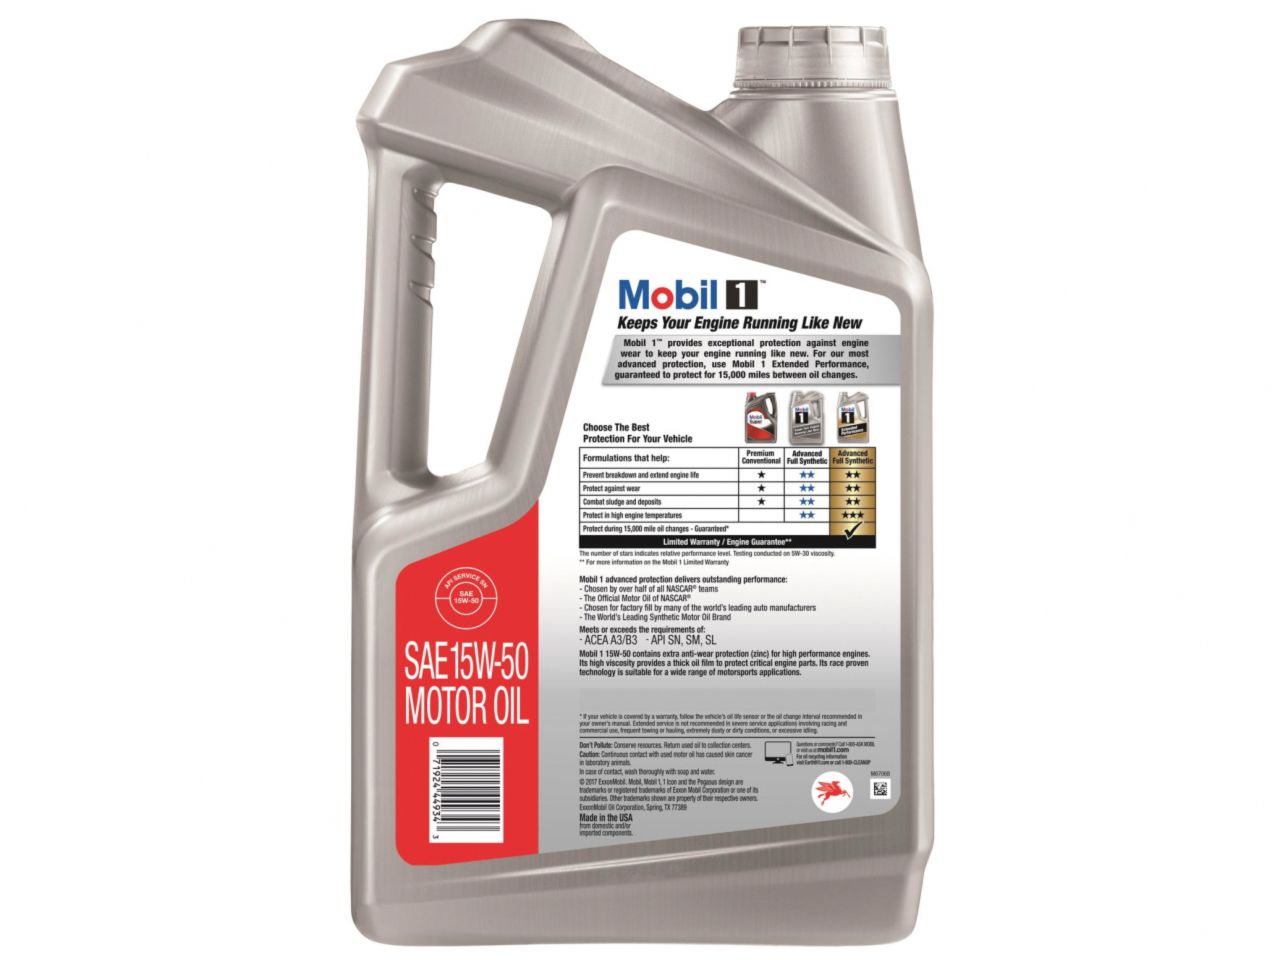 Mobil Motor Oil,  1, Synthetic, 15W50, 5 Qts., Set Of 3